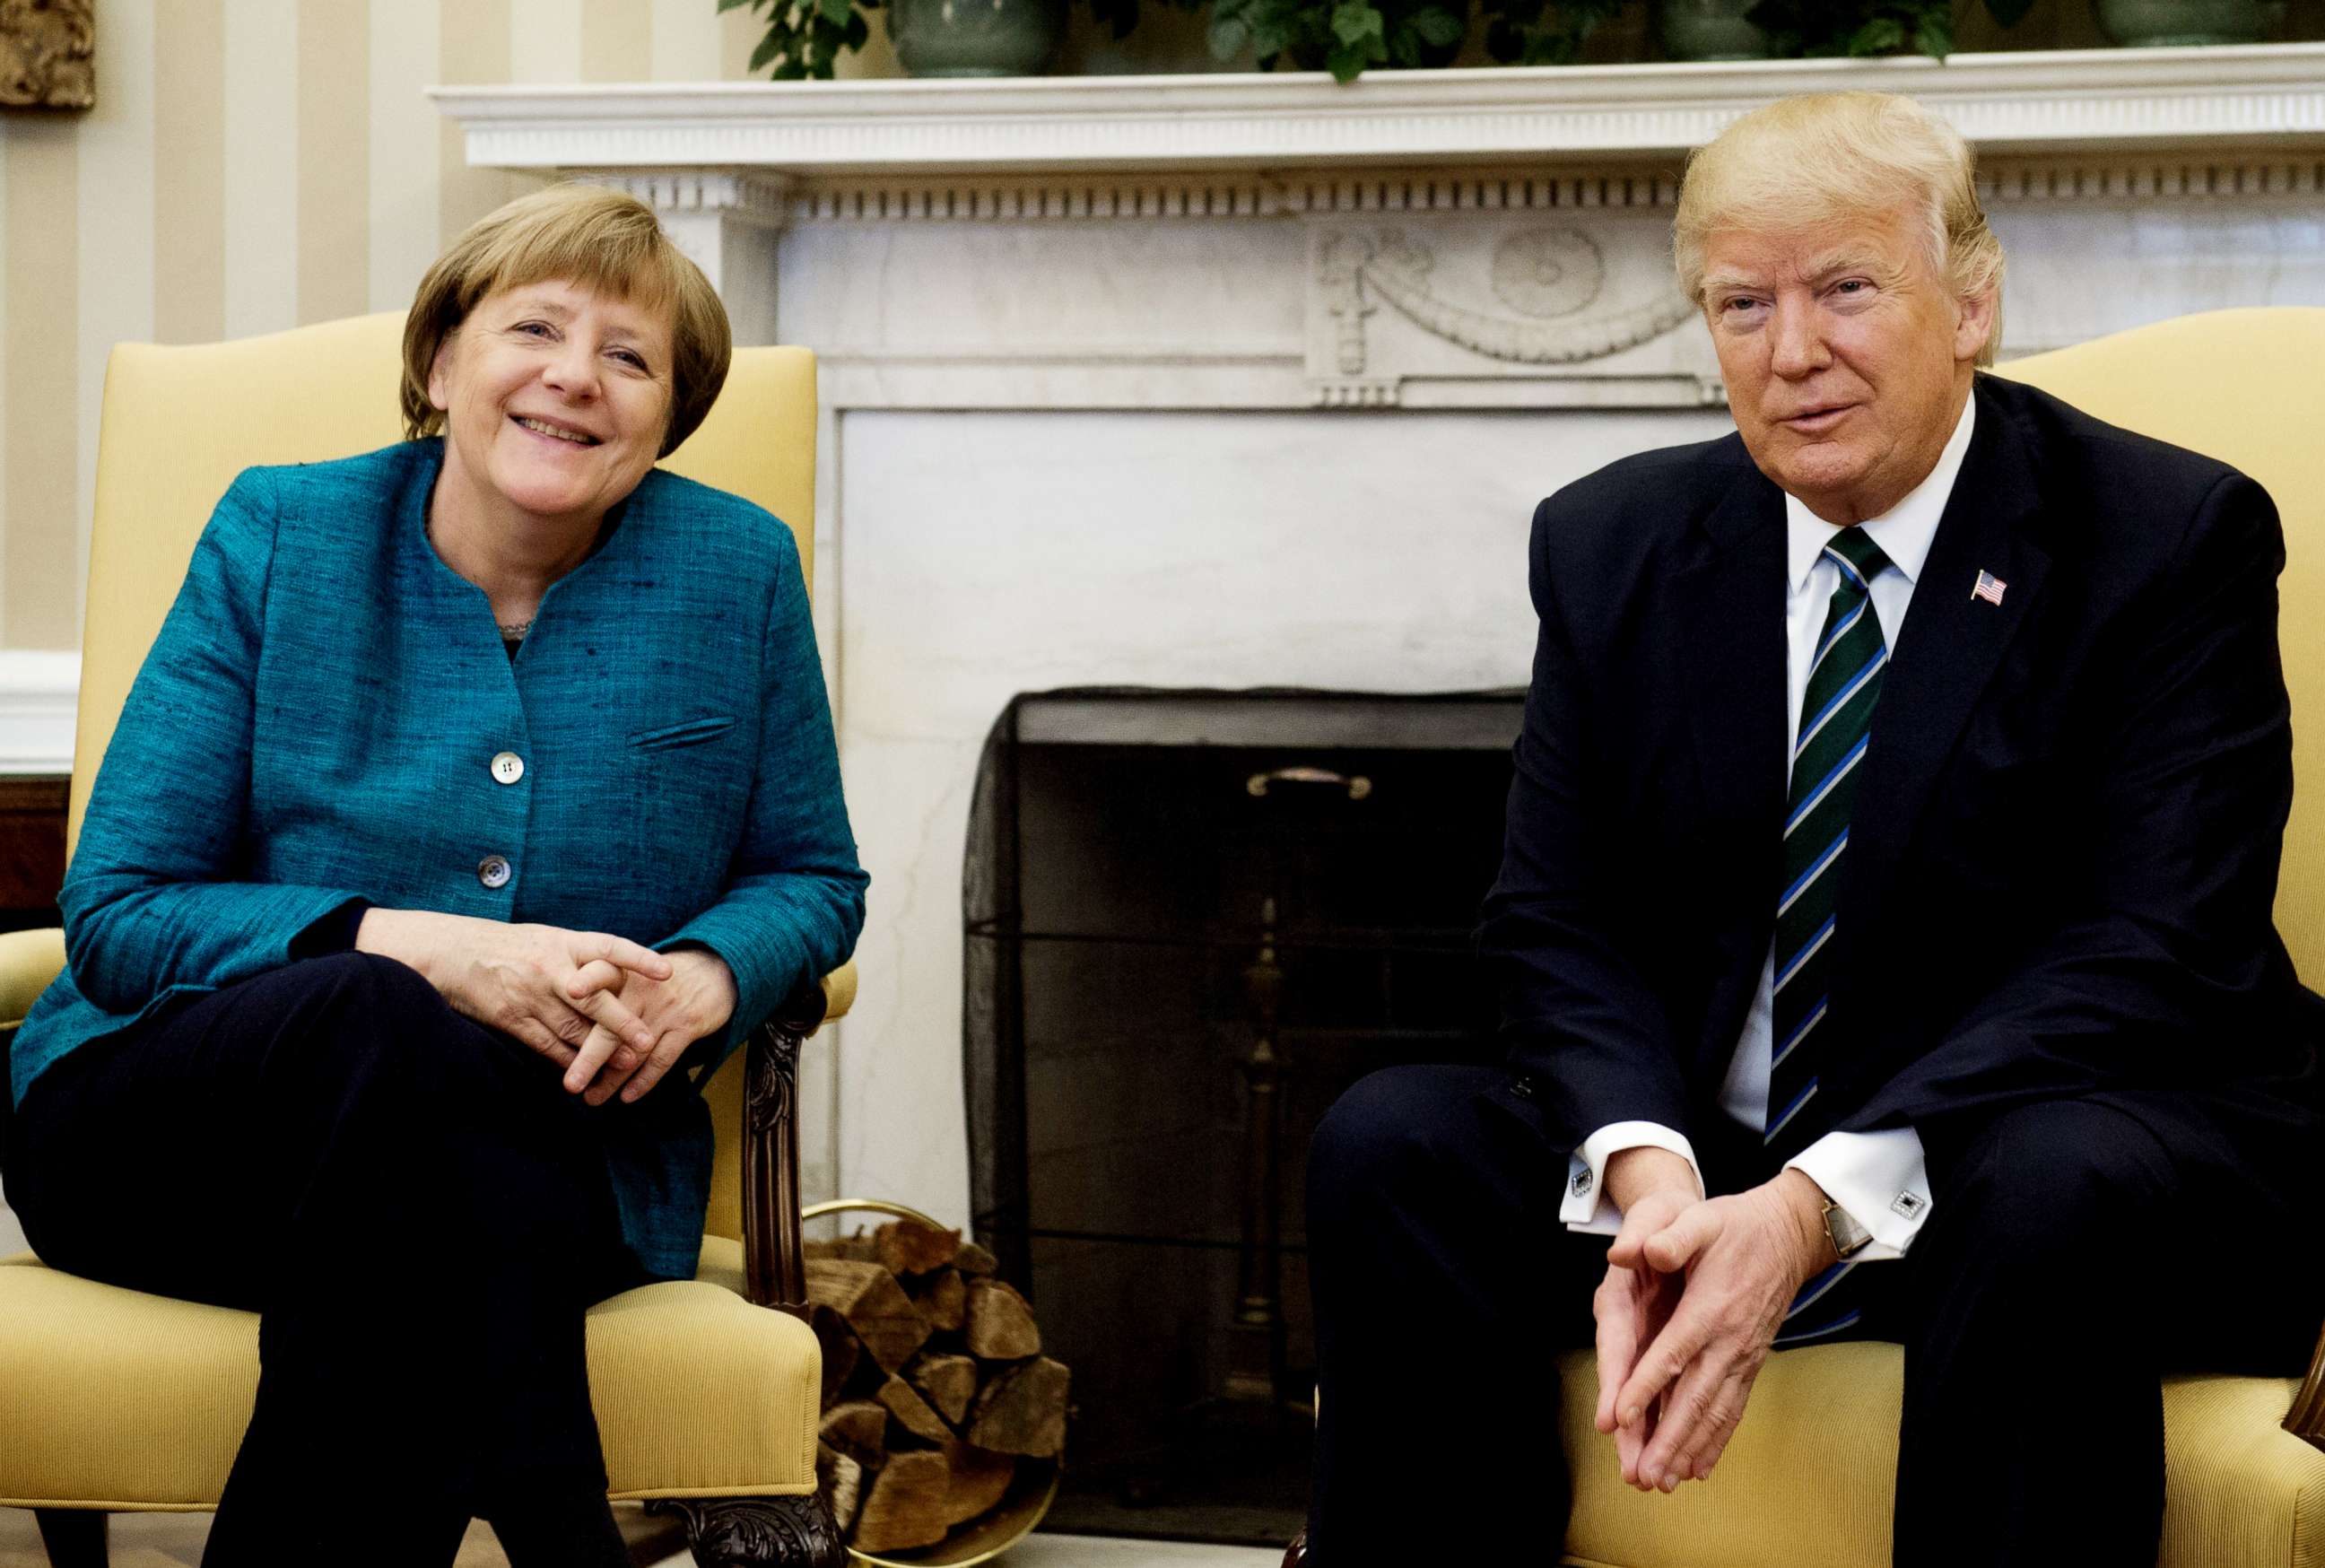 PHOTO: President Donald Trump and German Chancellor Angela Merkel meet in the Oval Office of the White House in this file photo taken March 17, 2017.